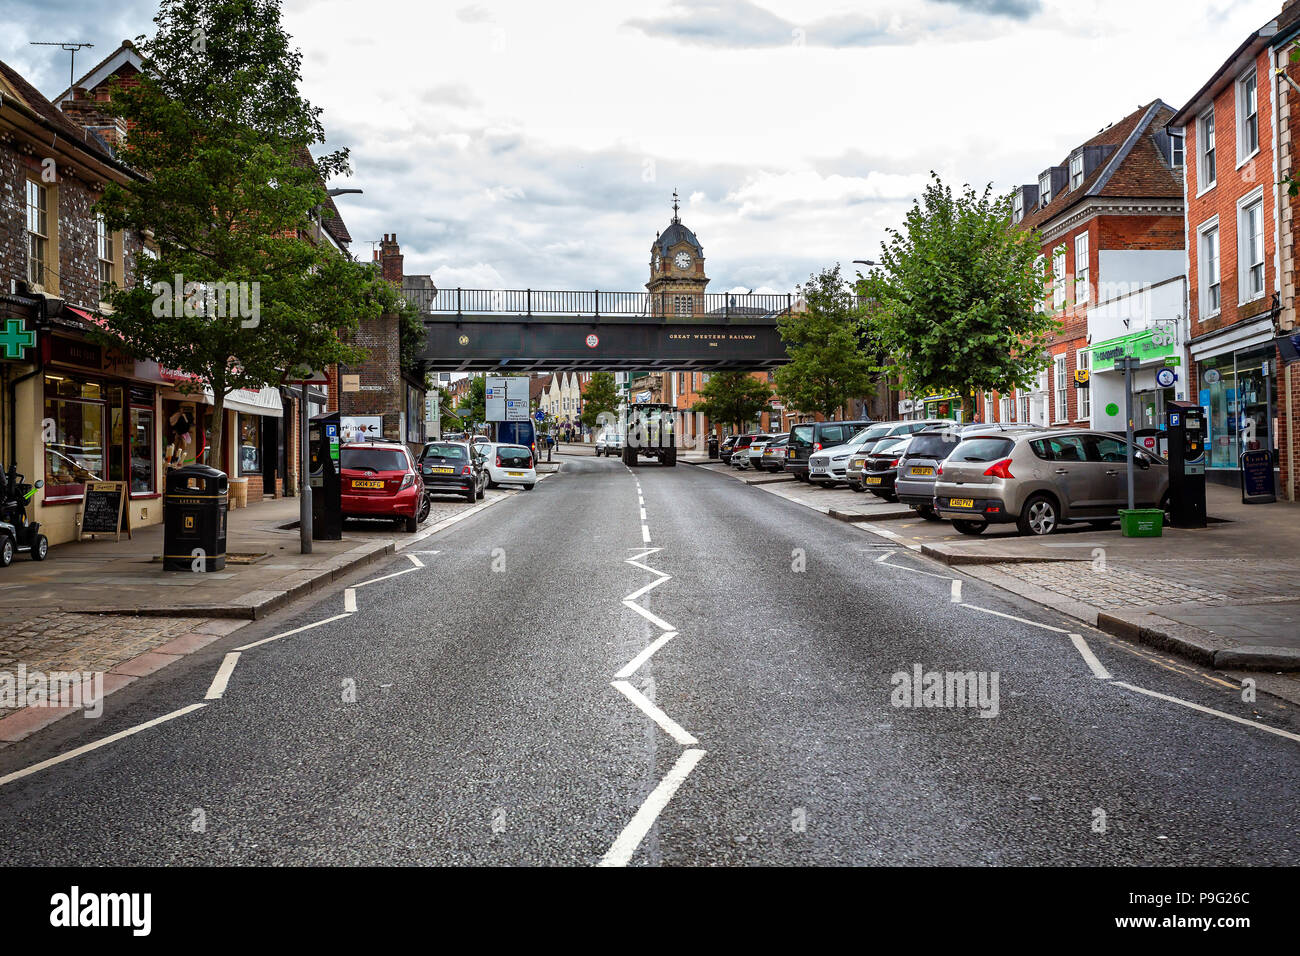 Ancient High Street of Hungerford, Berkshire, UK taken on 17 July 2018 Stock Photo